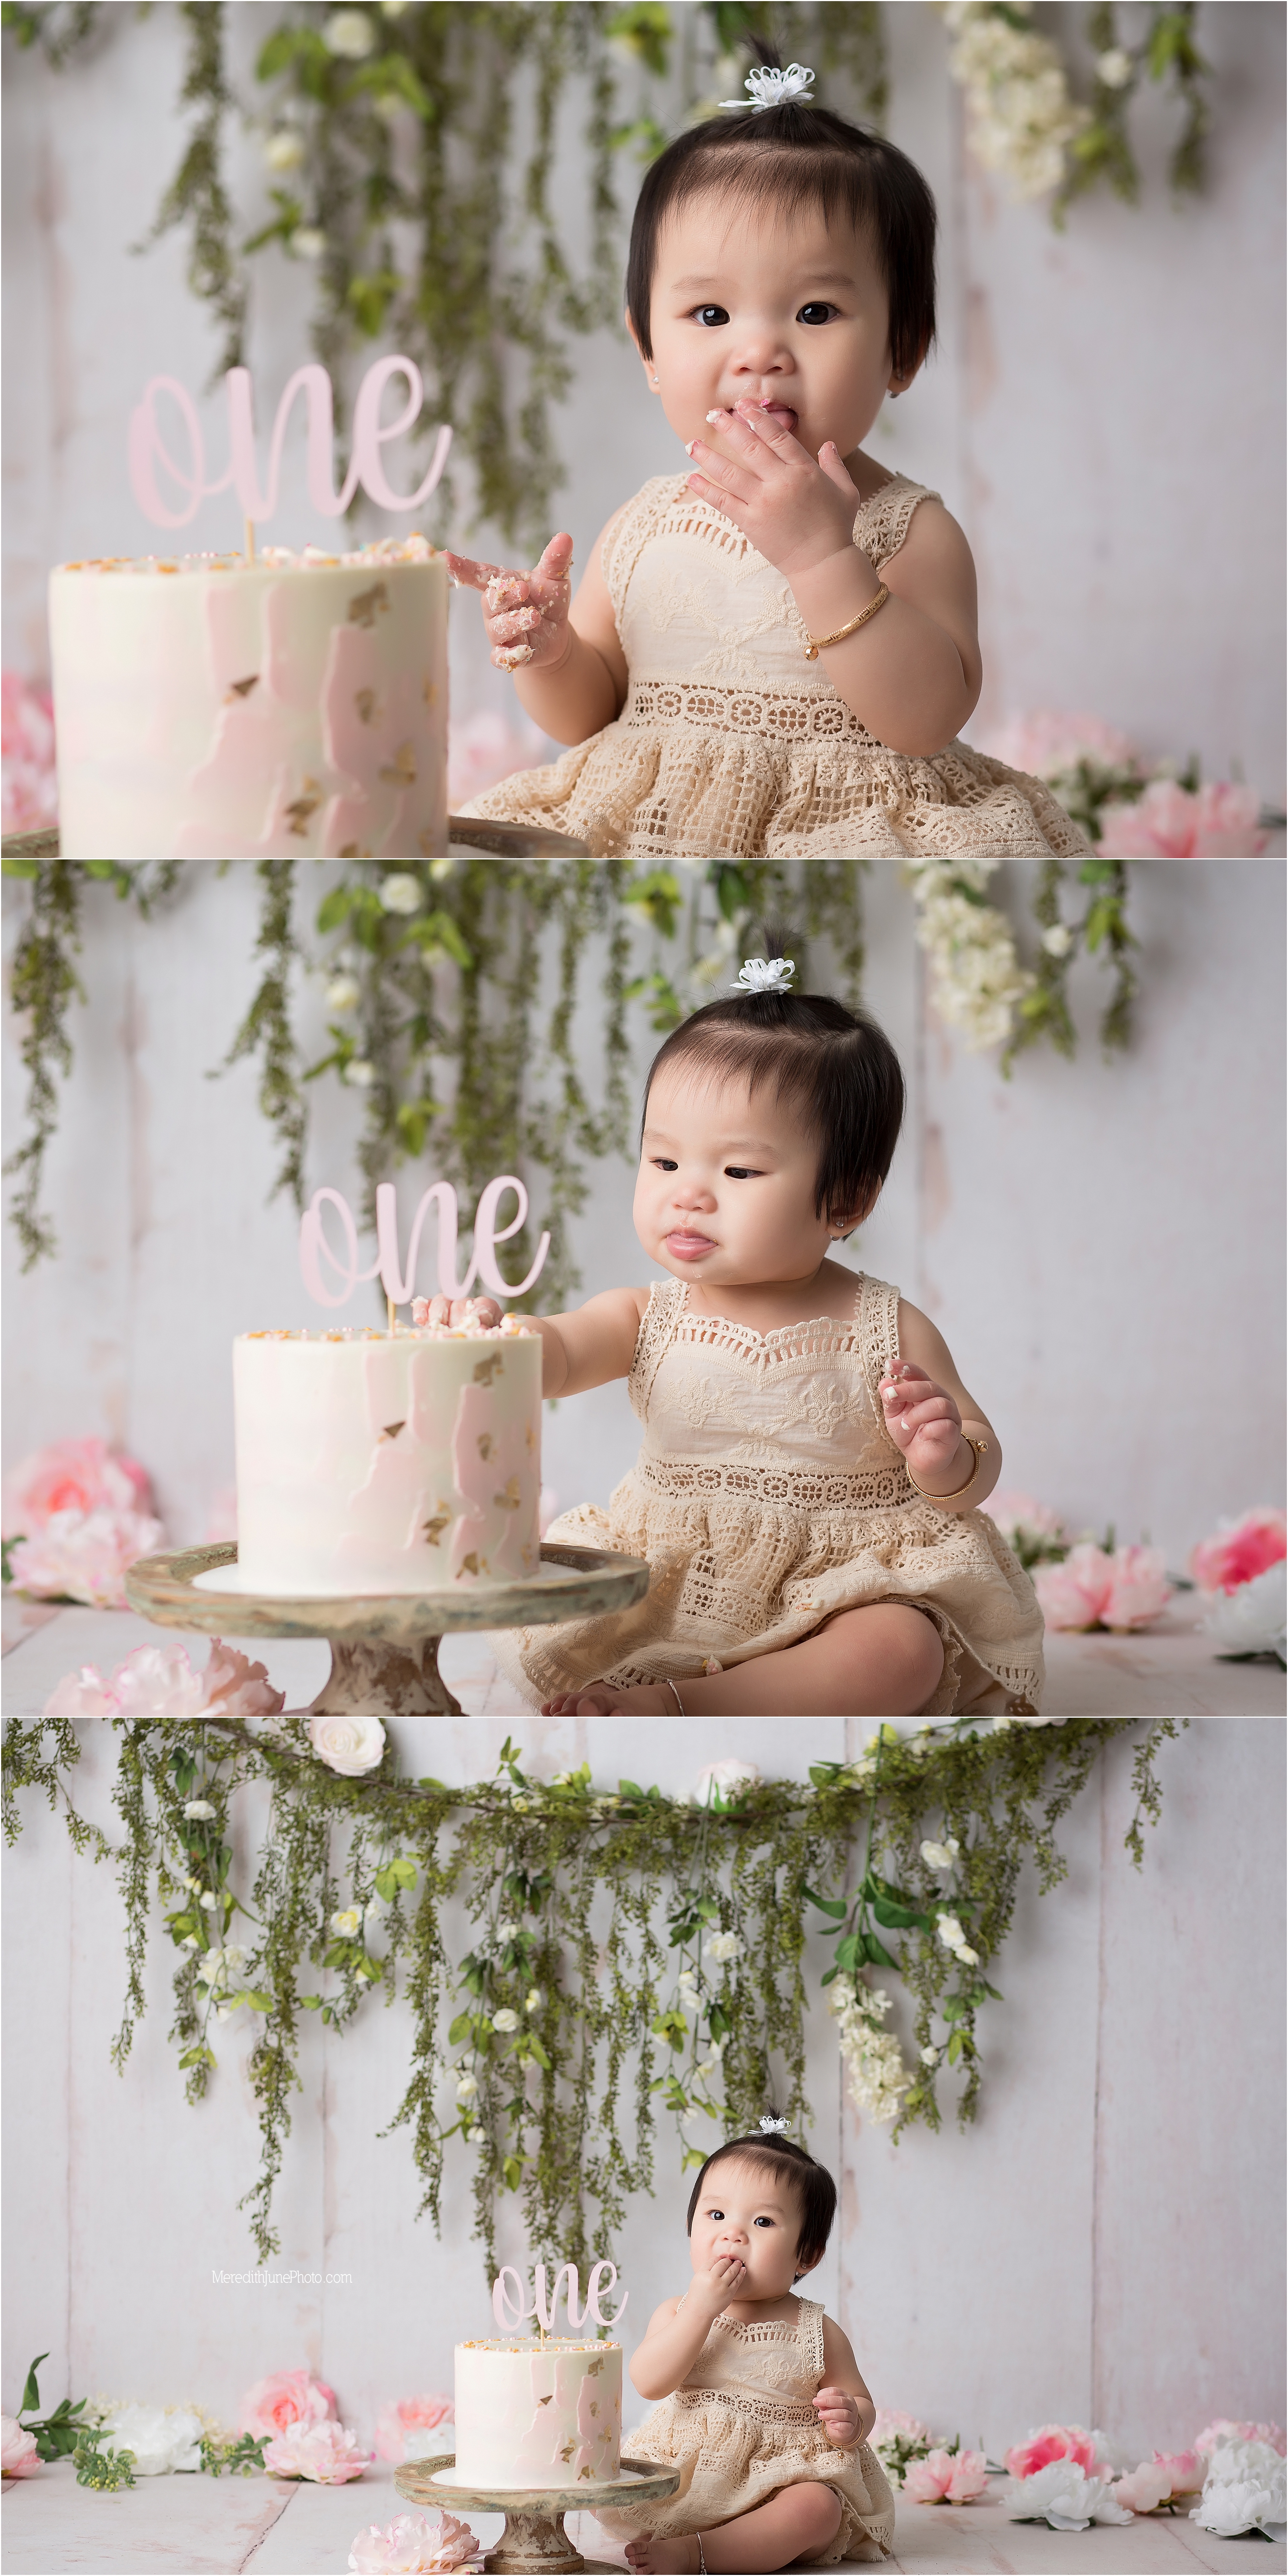 First birthday cake smash session for baby girl